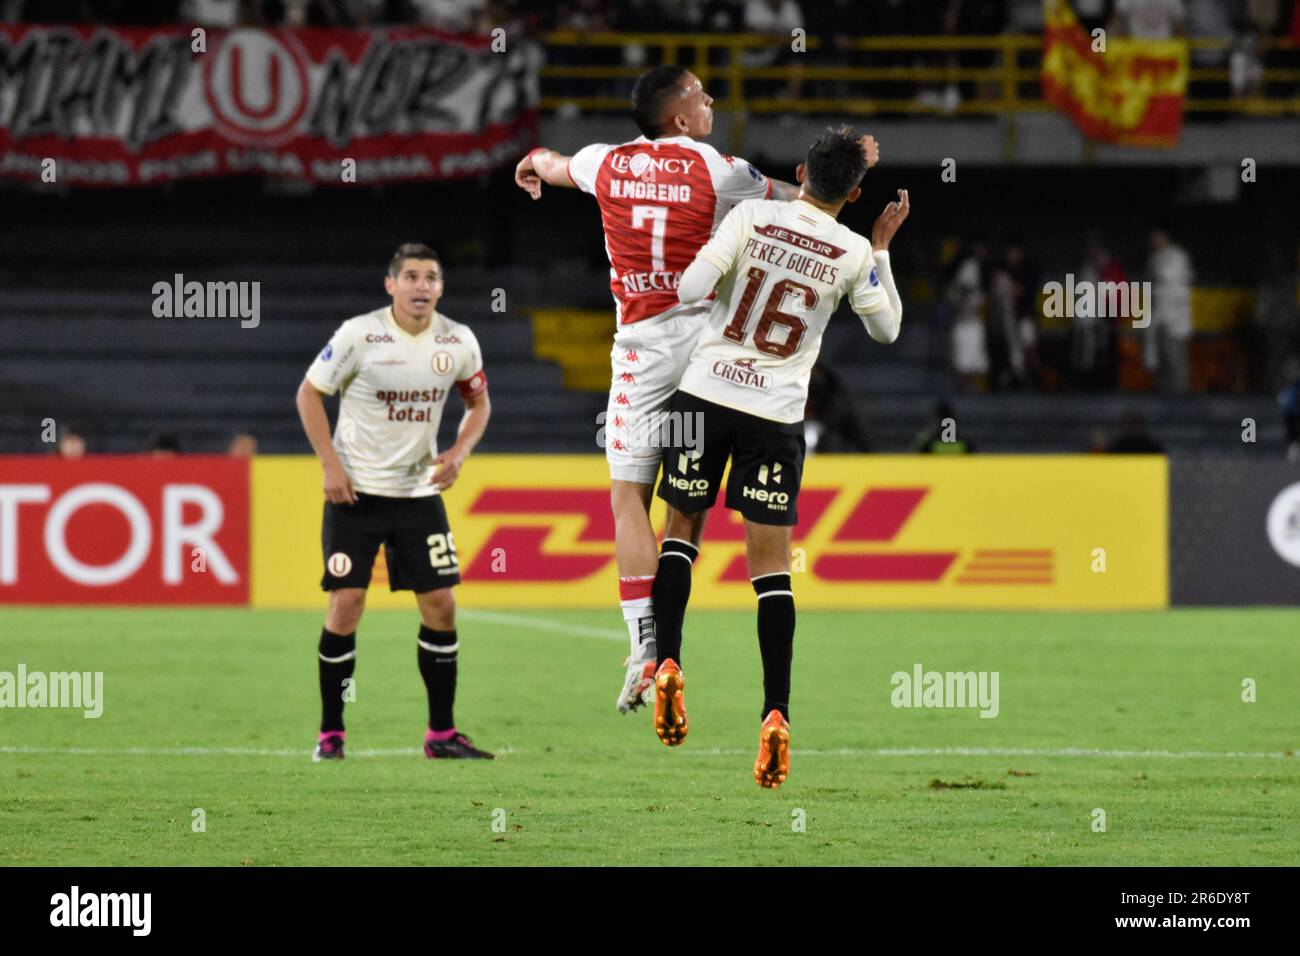 Bogota, Colombia. 08th June, 2023. Santa Fe's Neyder Moreno and Universitario's Martin Perez Guedes during the Peru's Universitario (0) V. Colombia's Santa Fe (2) group phase match of the CONMEBOL Libertadores, in Bogota, Colombia June 9, 2023. Photo by: Cristian Bayona/Long Visual Press Credit: Long Visual Press/Alamy Live News Stock Photo